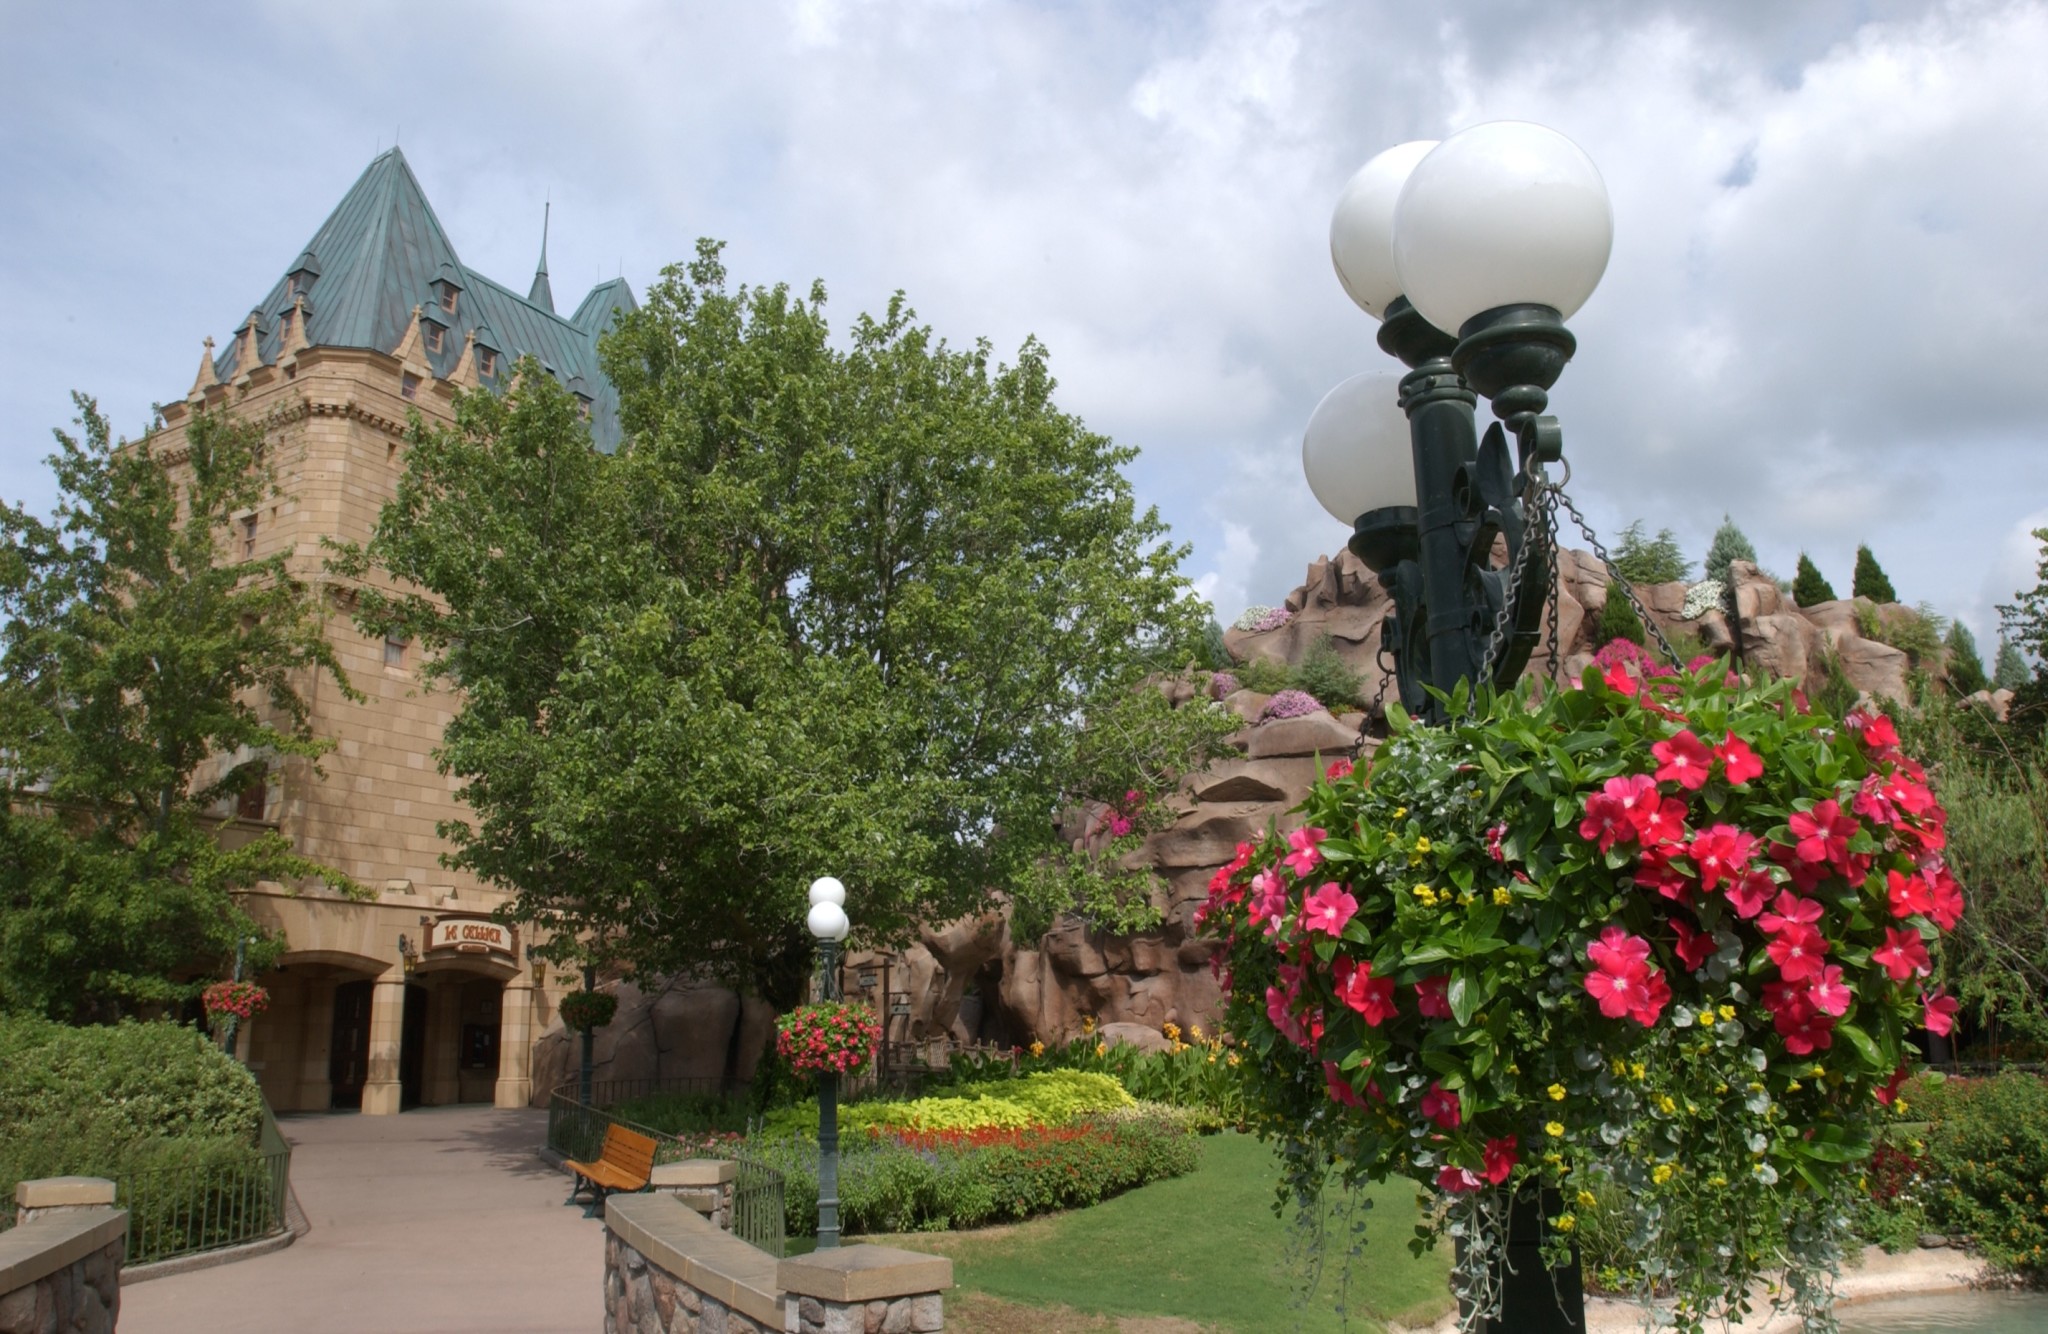 New! Le Cellier is Offering Brunch for a Limited Time